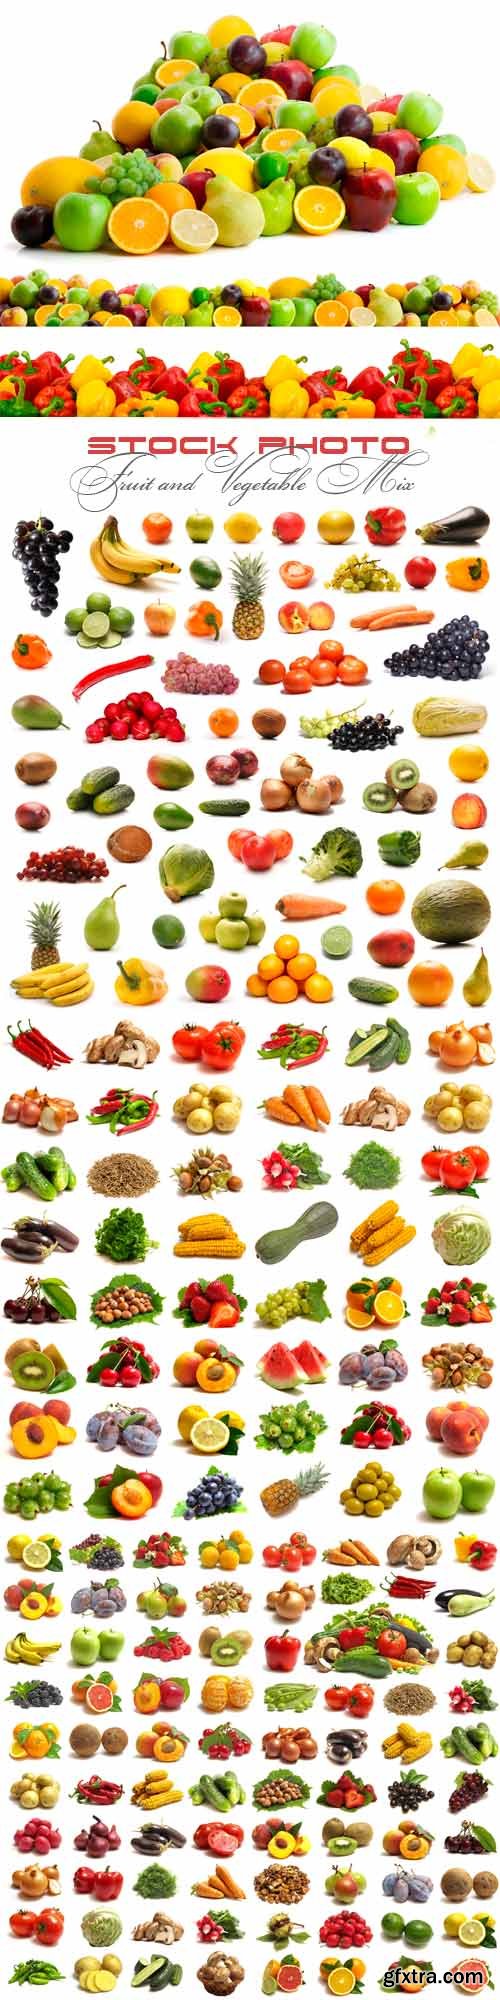 Fruit and vegetable mix